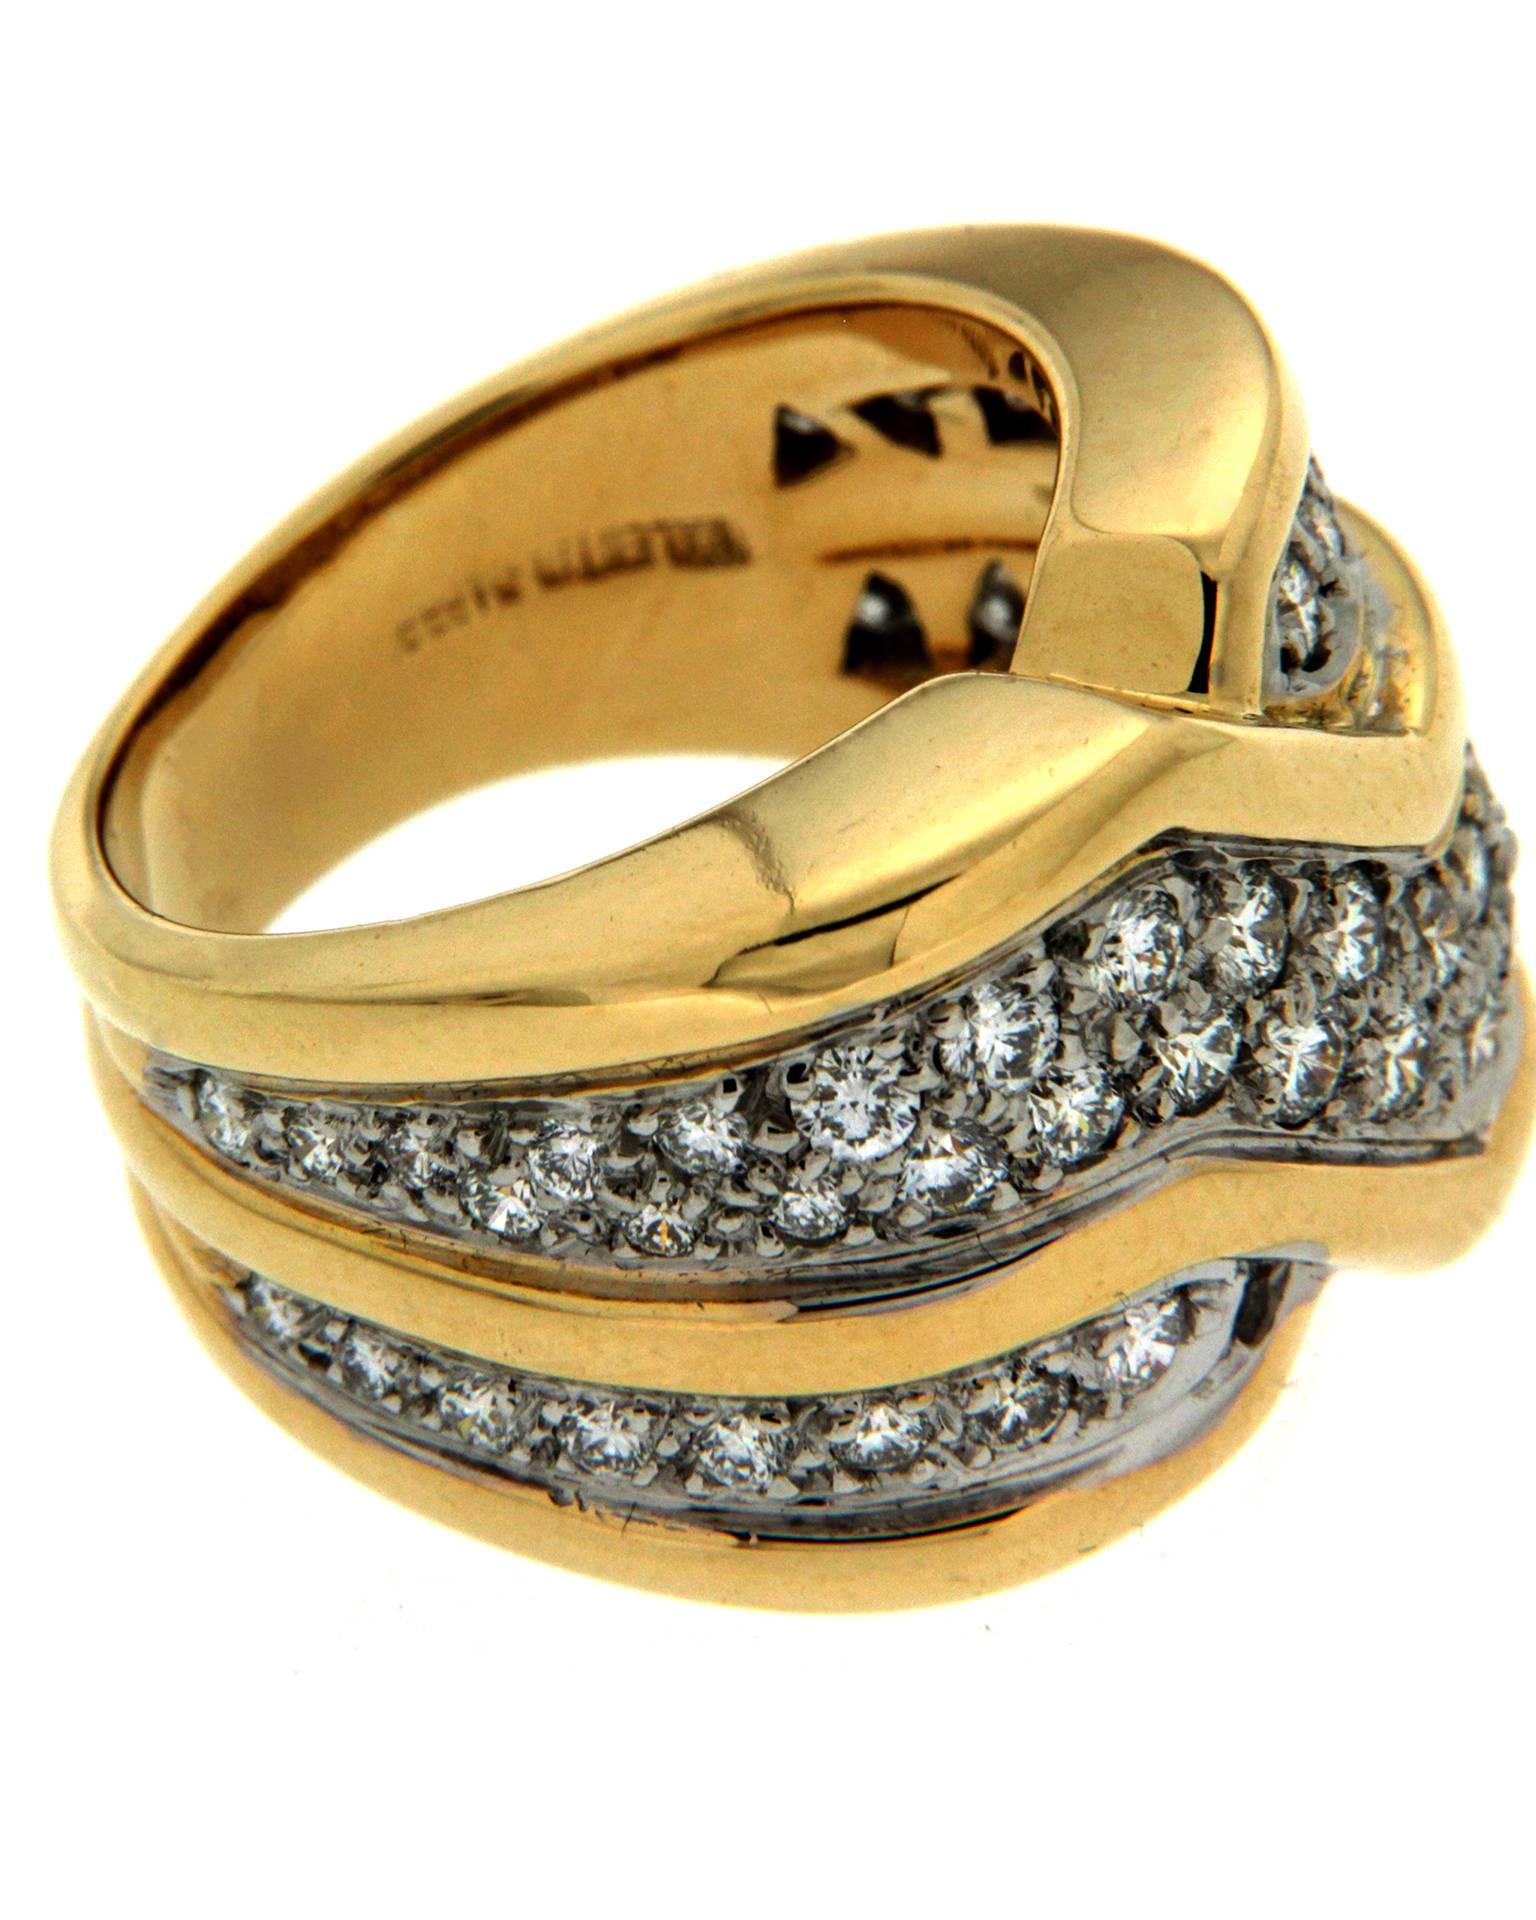 The ring is made in 18kt yellow gold, it features 47 round brilliant diamonds which are pave set and has a diamond carat total weight of 1.33cts.